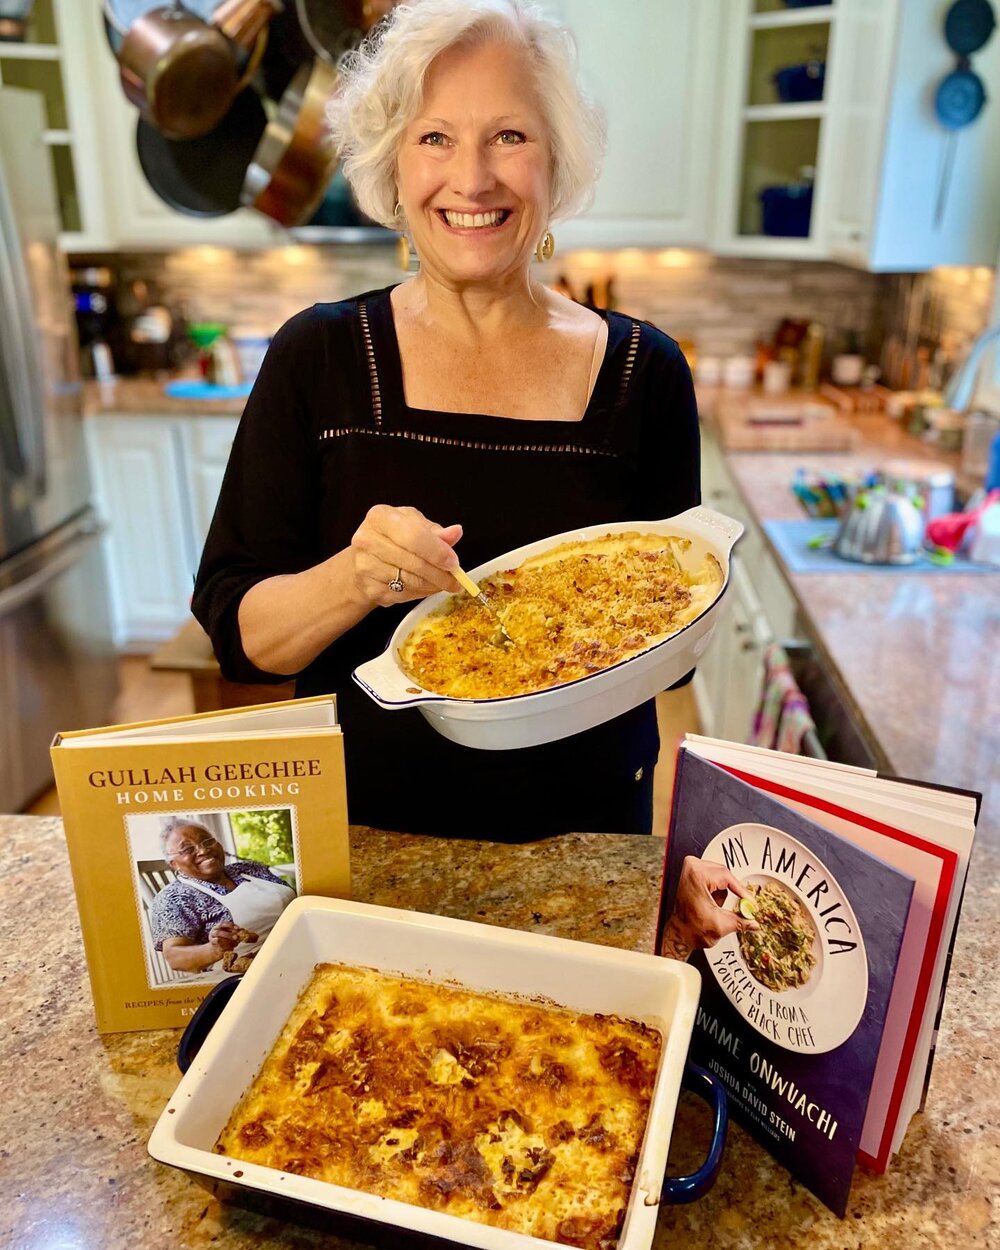 The low-down on cornbread from two great cookbooks found @redbarnmerc; read my latest article in @alxstylebook https://alexandriastylebook.com/alexandria-stylebook/the-storied-and-delicious-dish-mac-and-cheese-redbarn-august-2022 #cornbread #soulfood